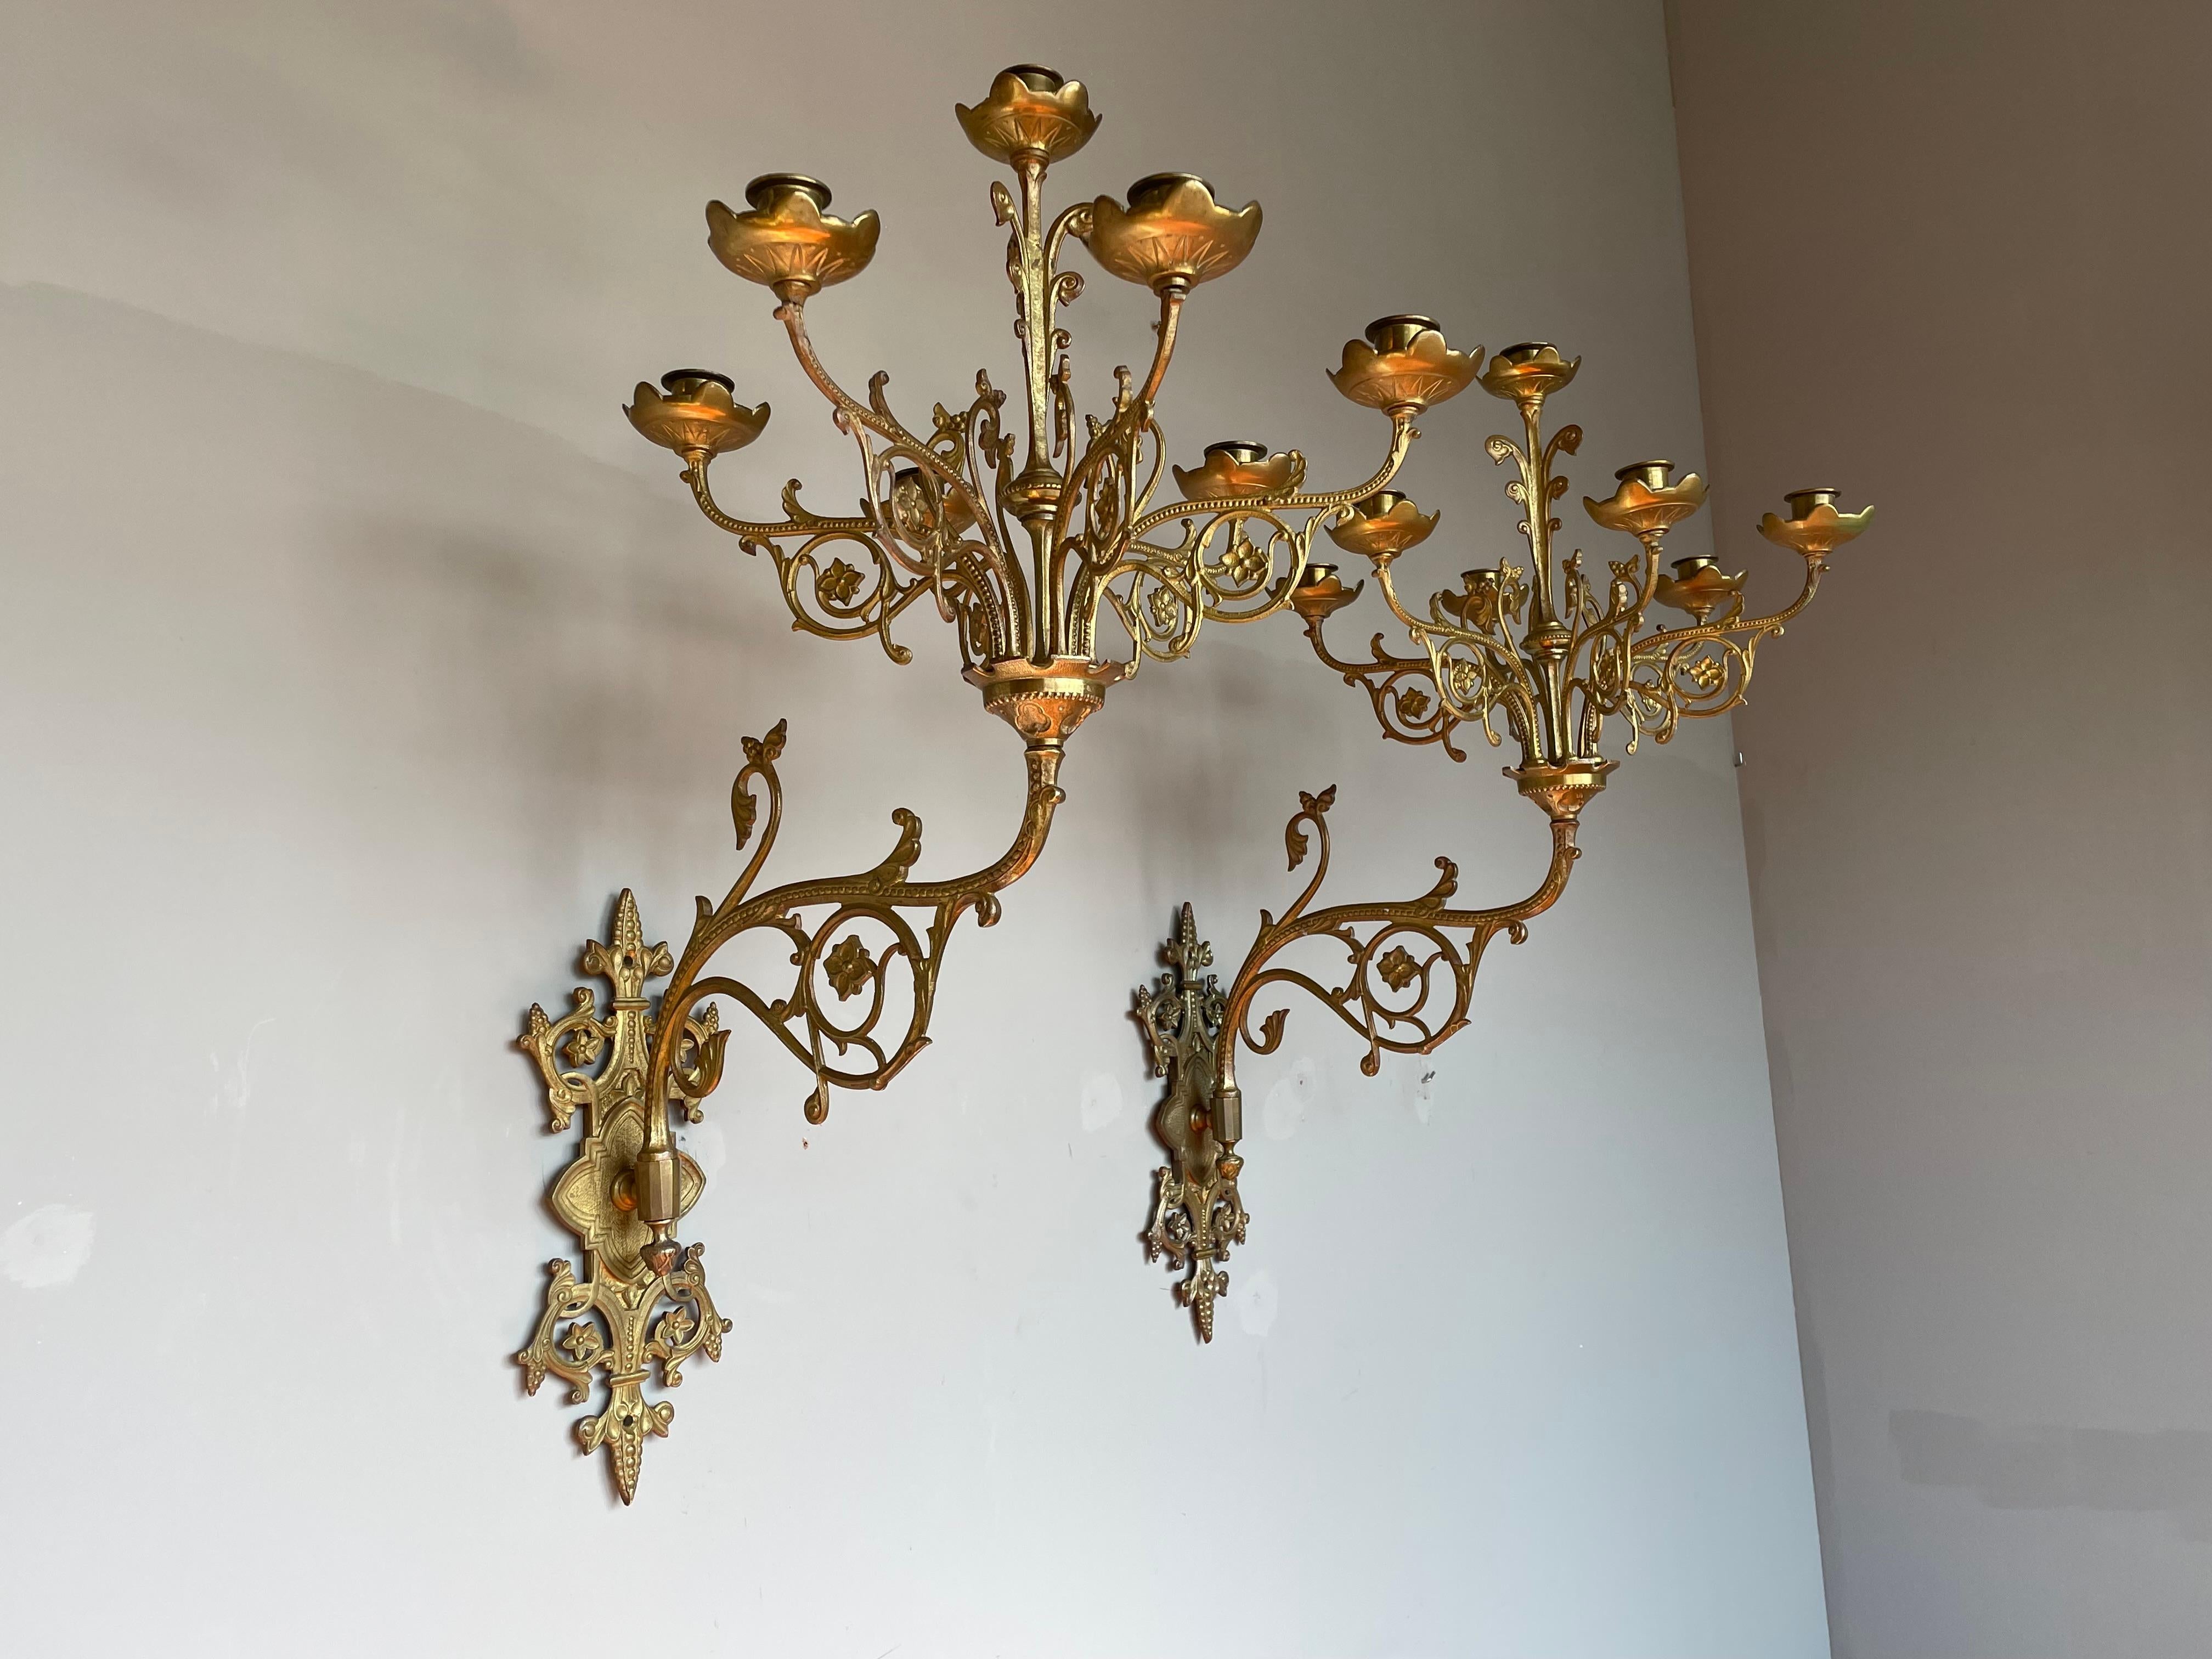 Beautiful and large size pair of Gothic Revival candle sconces for wall mounting.

This rare pair of antique Gothic wall sconces for seven candles each is another one of those antiques of which we immediately realize that they tick all the boxes.